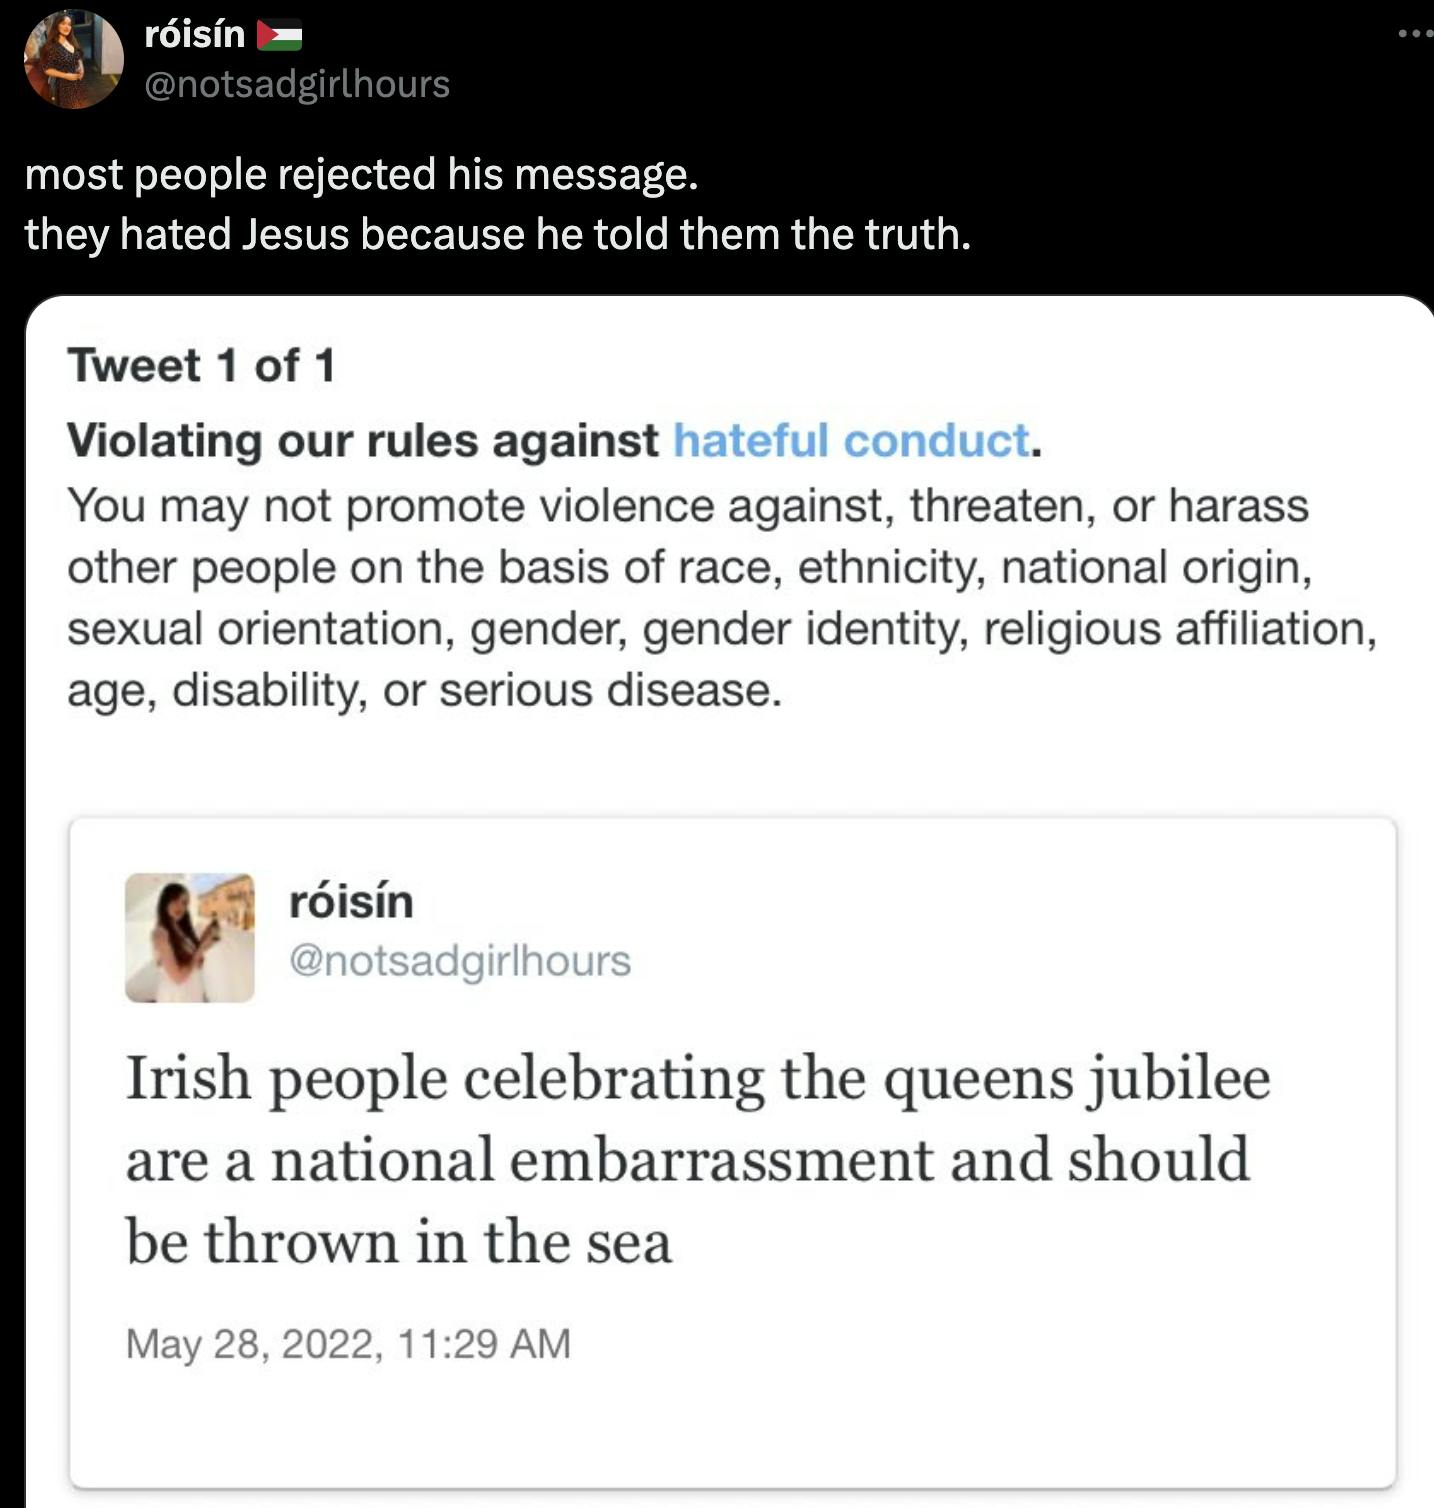 Tweet reading: 'Most people rejected his message. They hated Jesus because he told them the truth' in response to a Twitter violation on another tweet reading 'Irish people celebrating the queens jubilee are a national embarrassment and should be thrown in the sea'